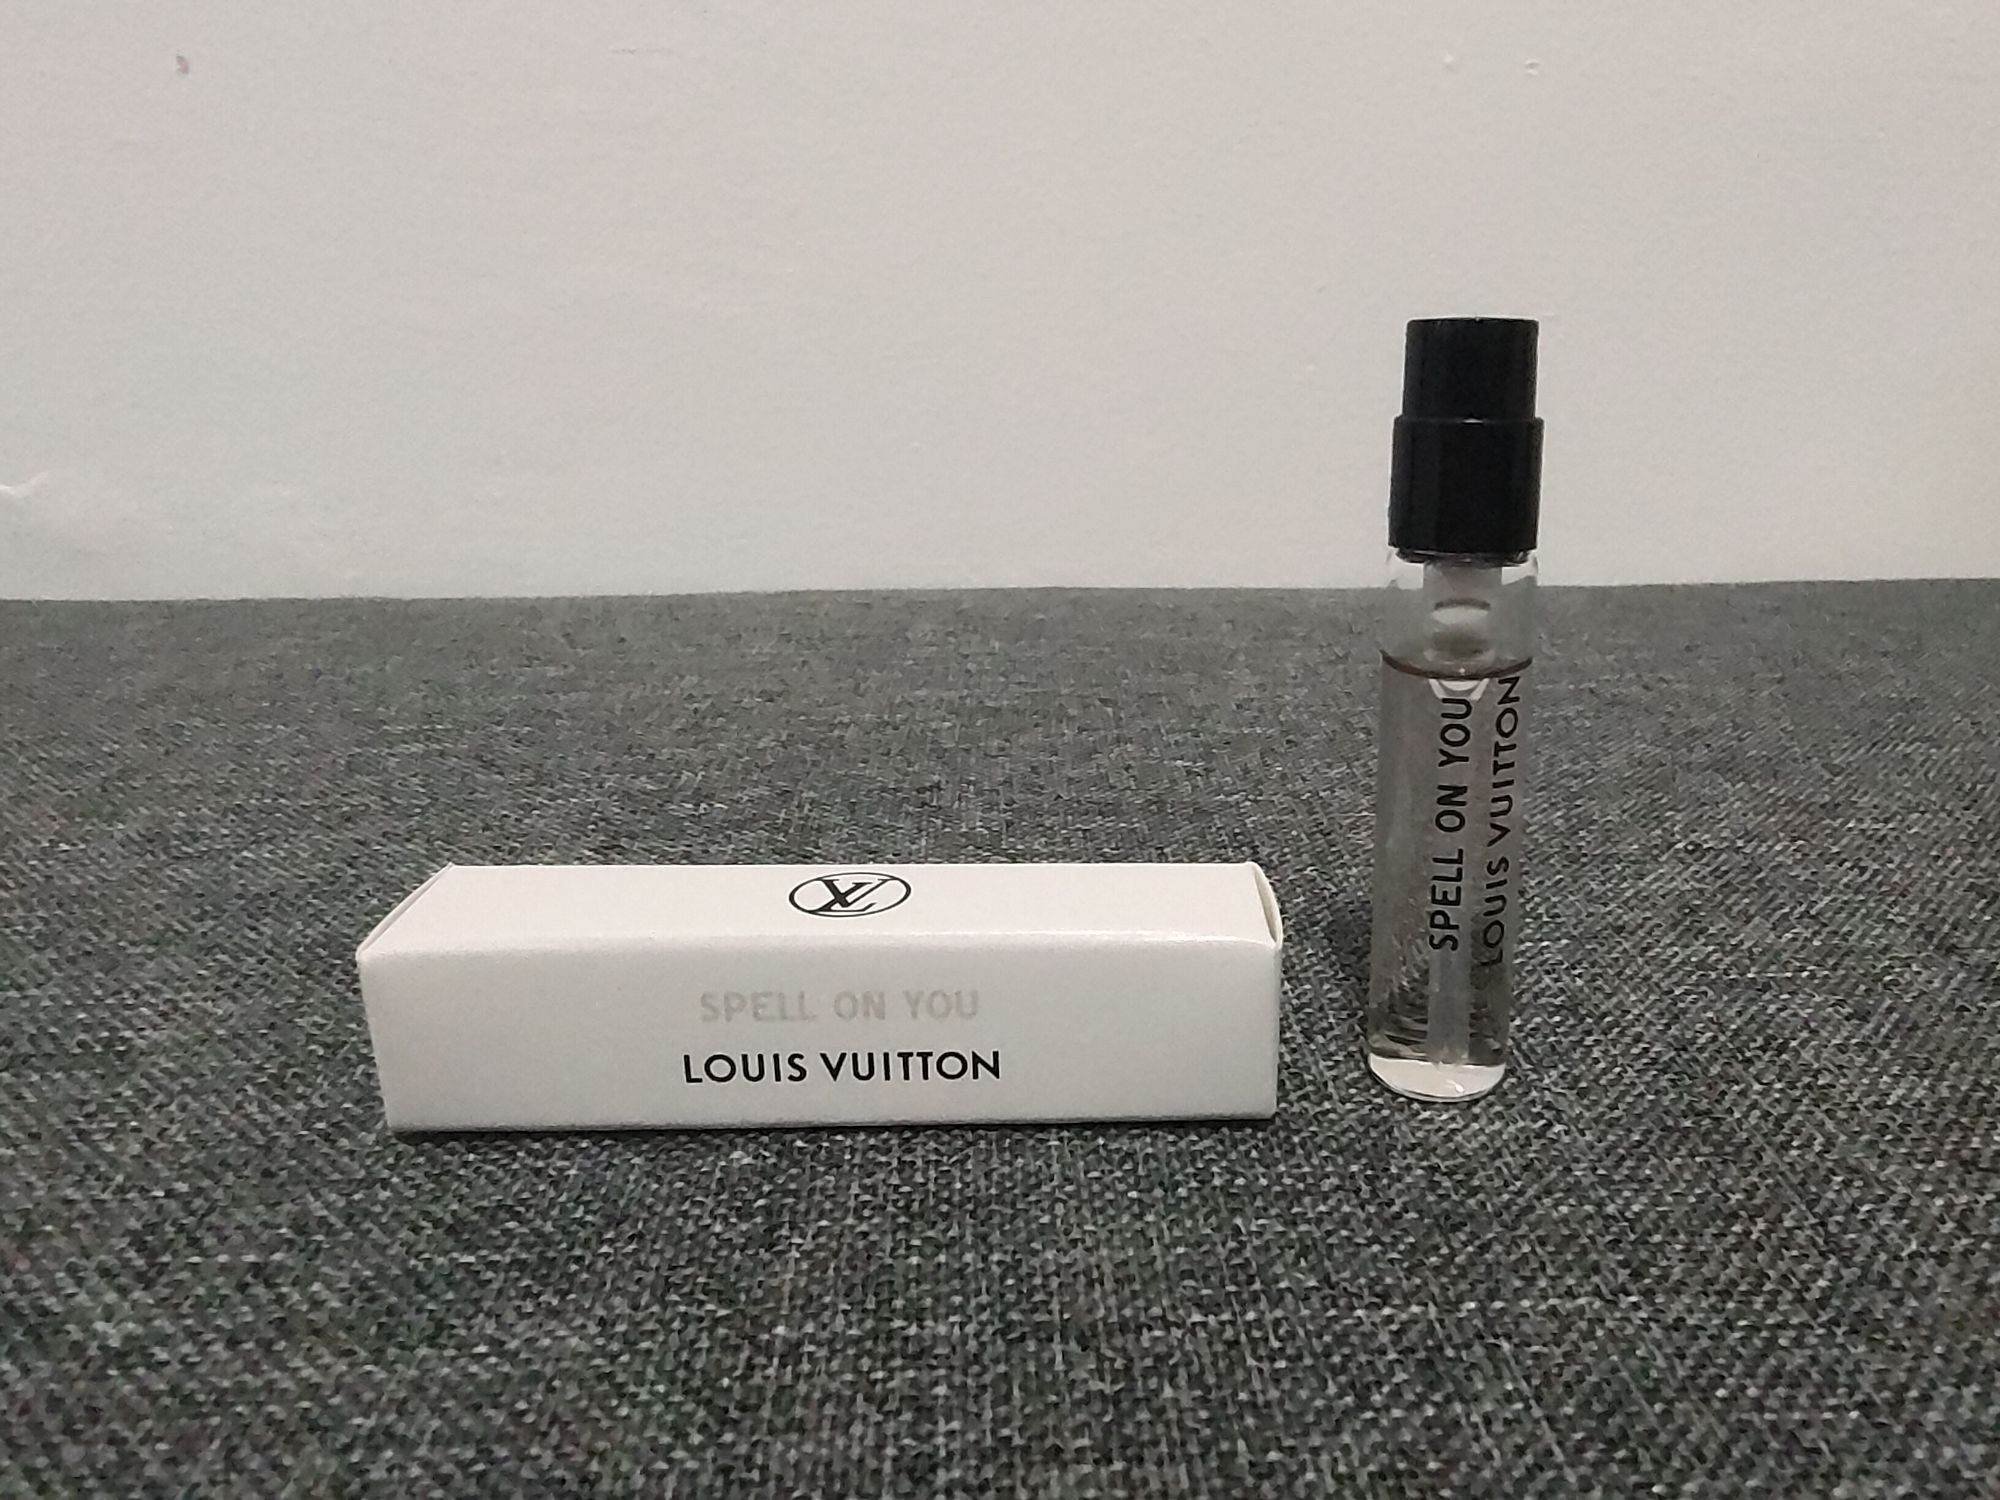 LOUIS VUITTON fragrance review SPELL ON YOU - LV perfume - does